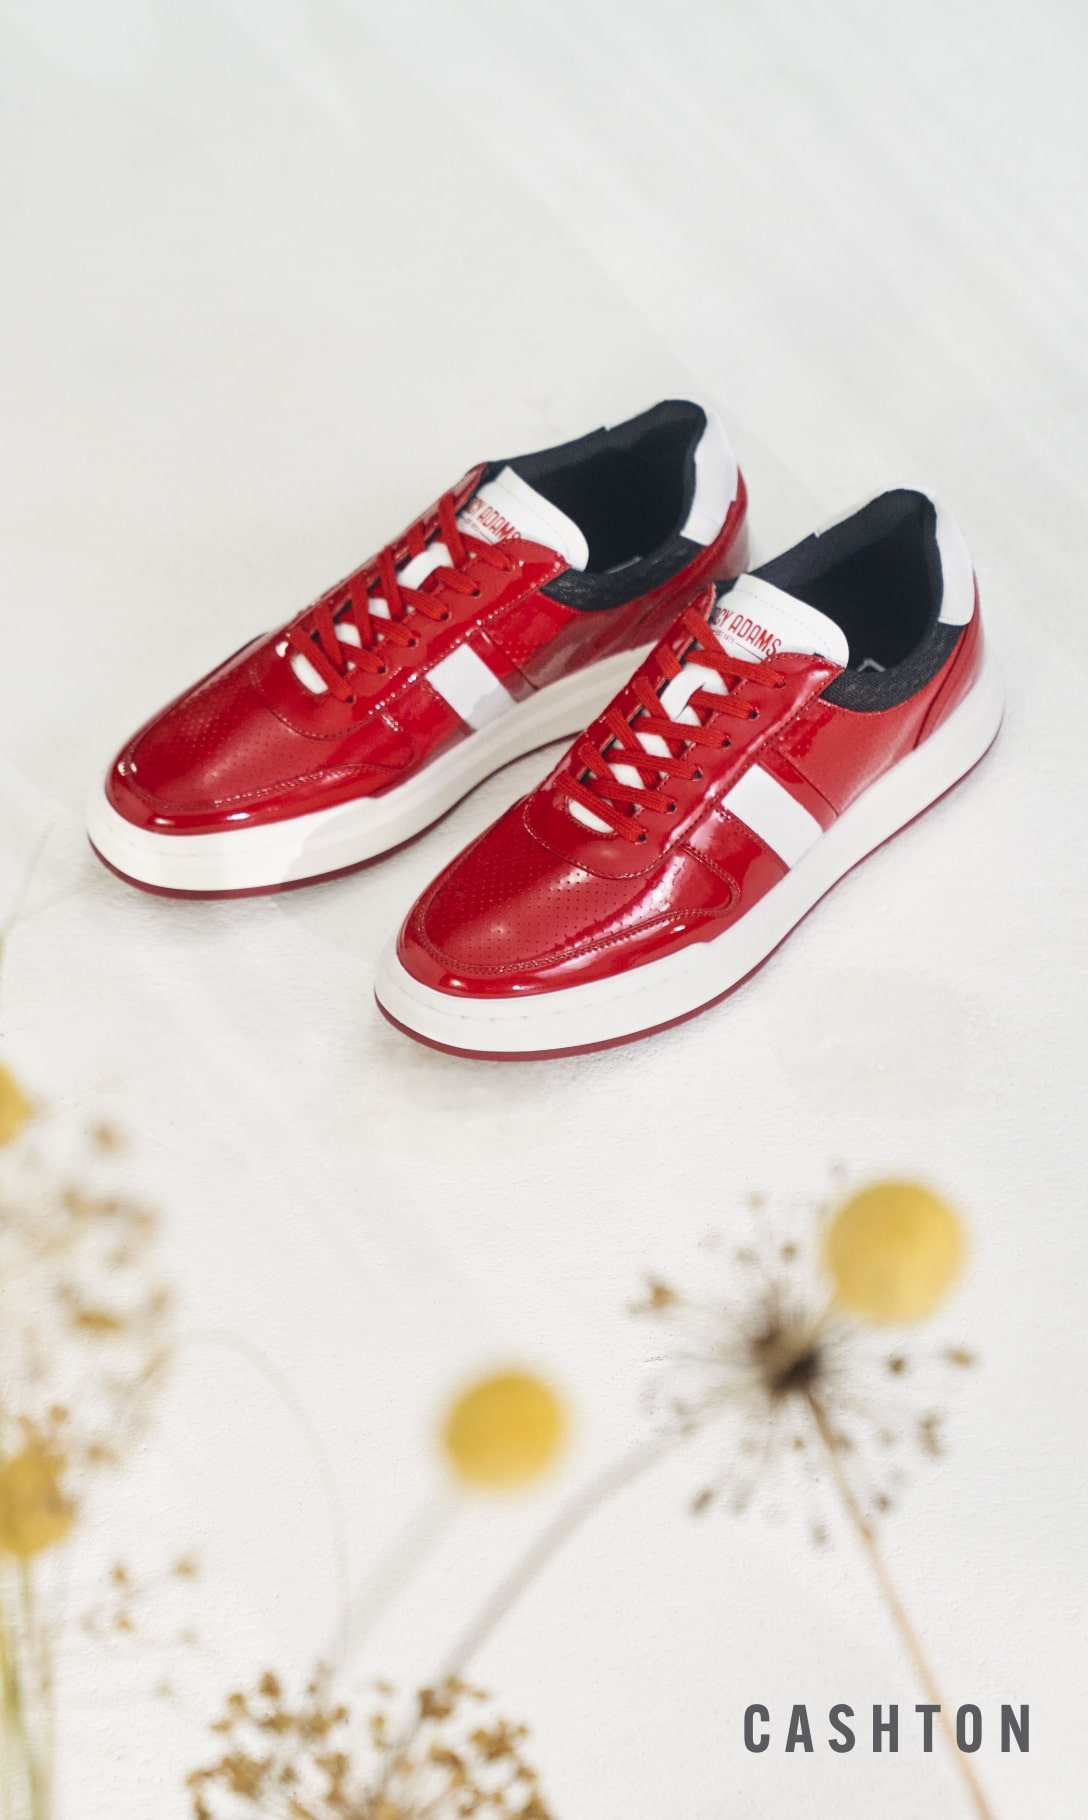 Men's Casual Shoes category. Image features the Cashton sneaker in red. 